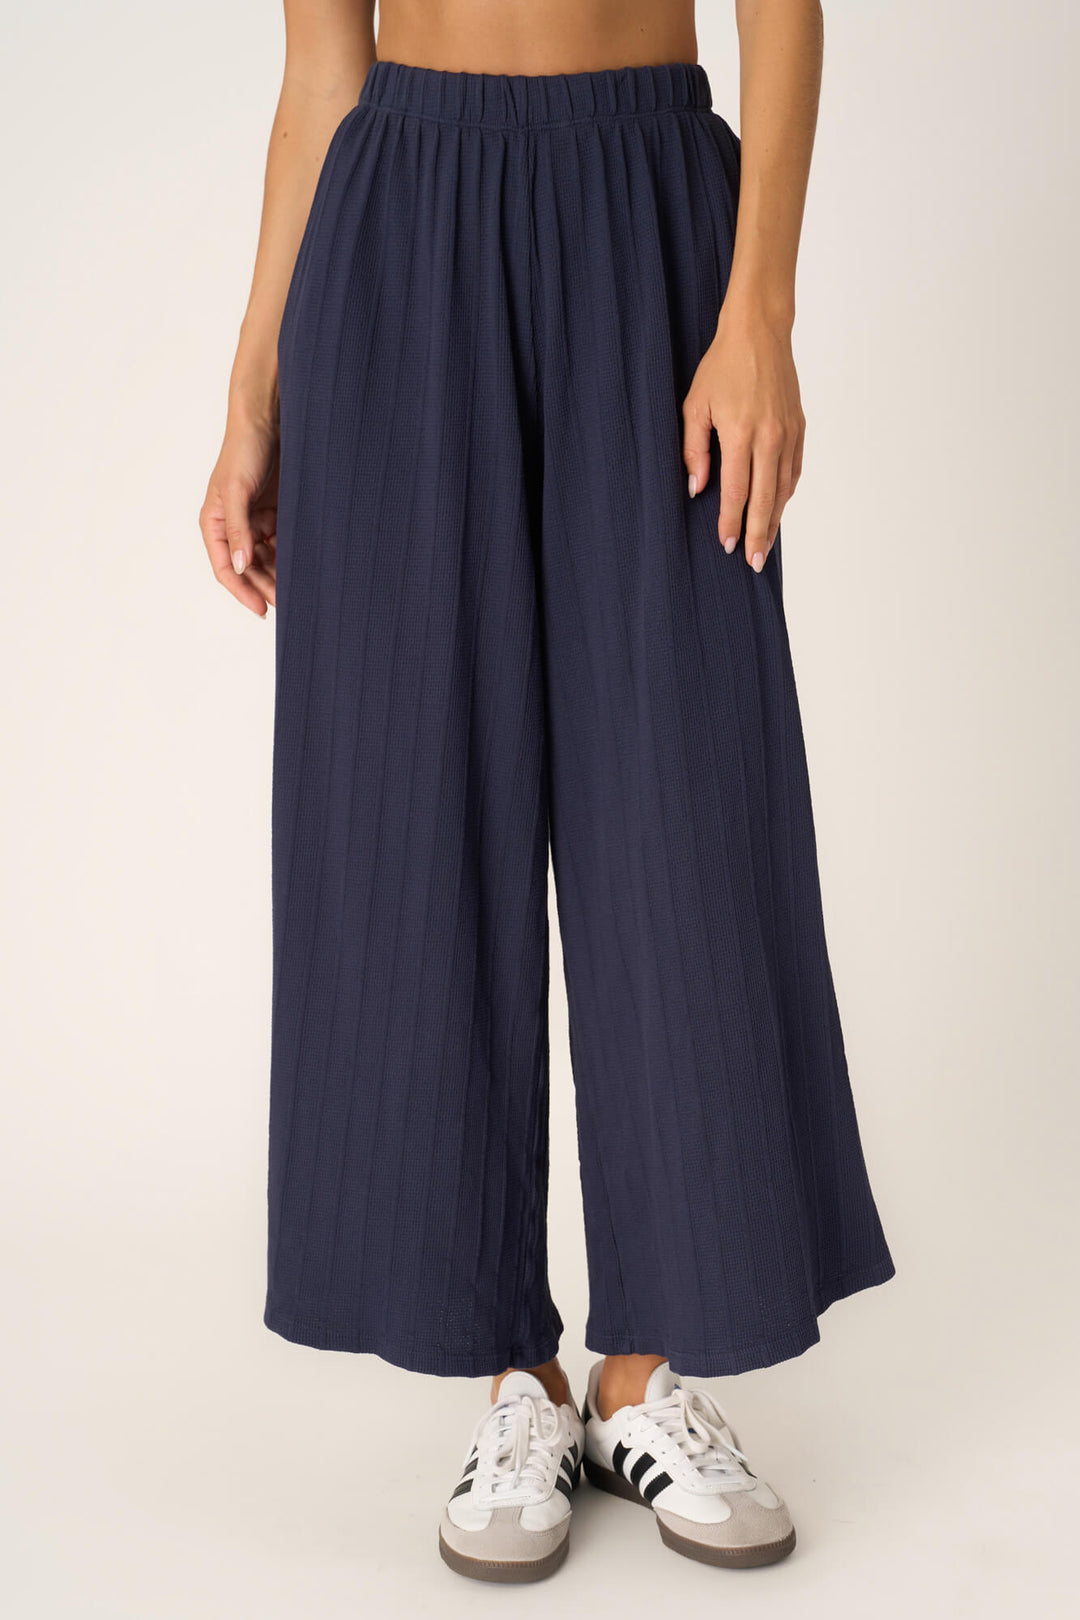 COME TOGETHER TEXTURED WIDE LEG PANT